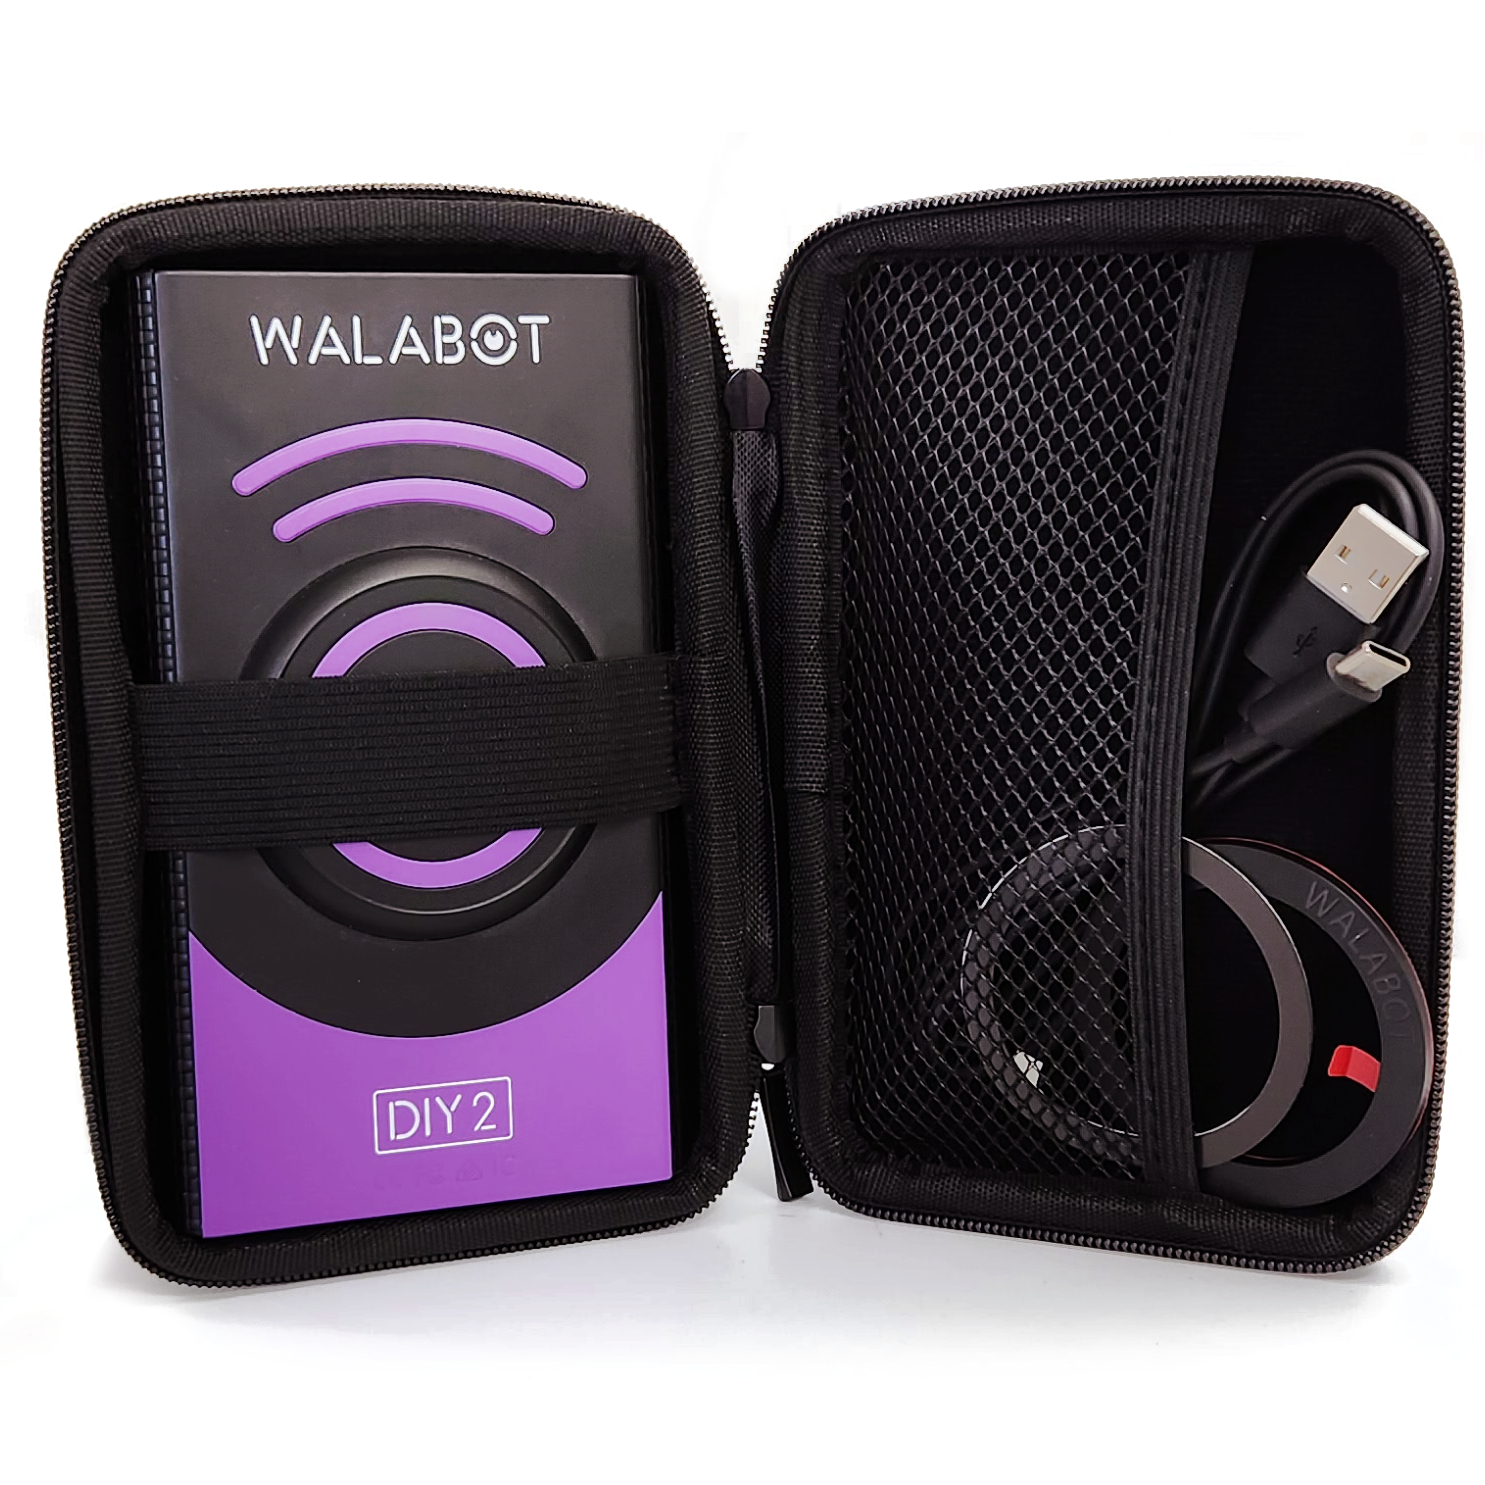 Walabot DIY 2 brings X-Ray Superpowers to your Smartphone - Highways Today